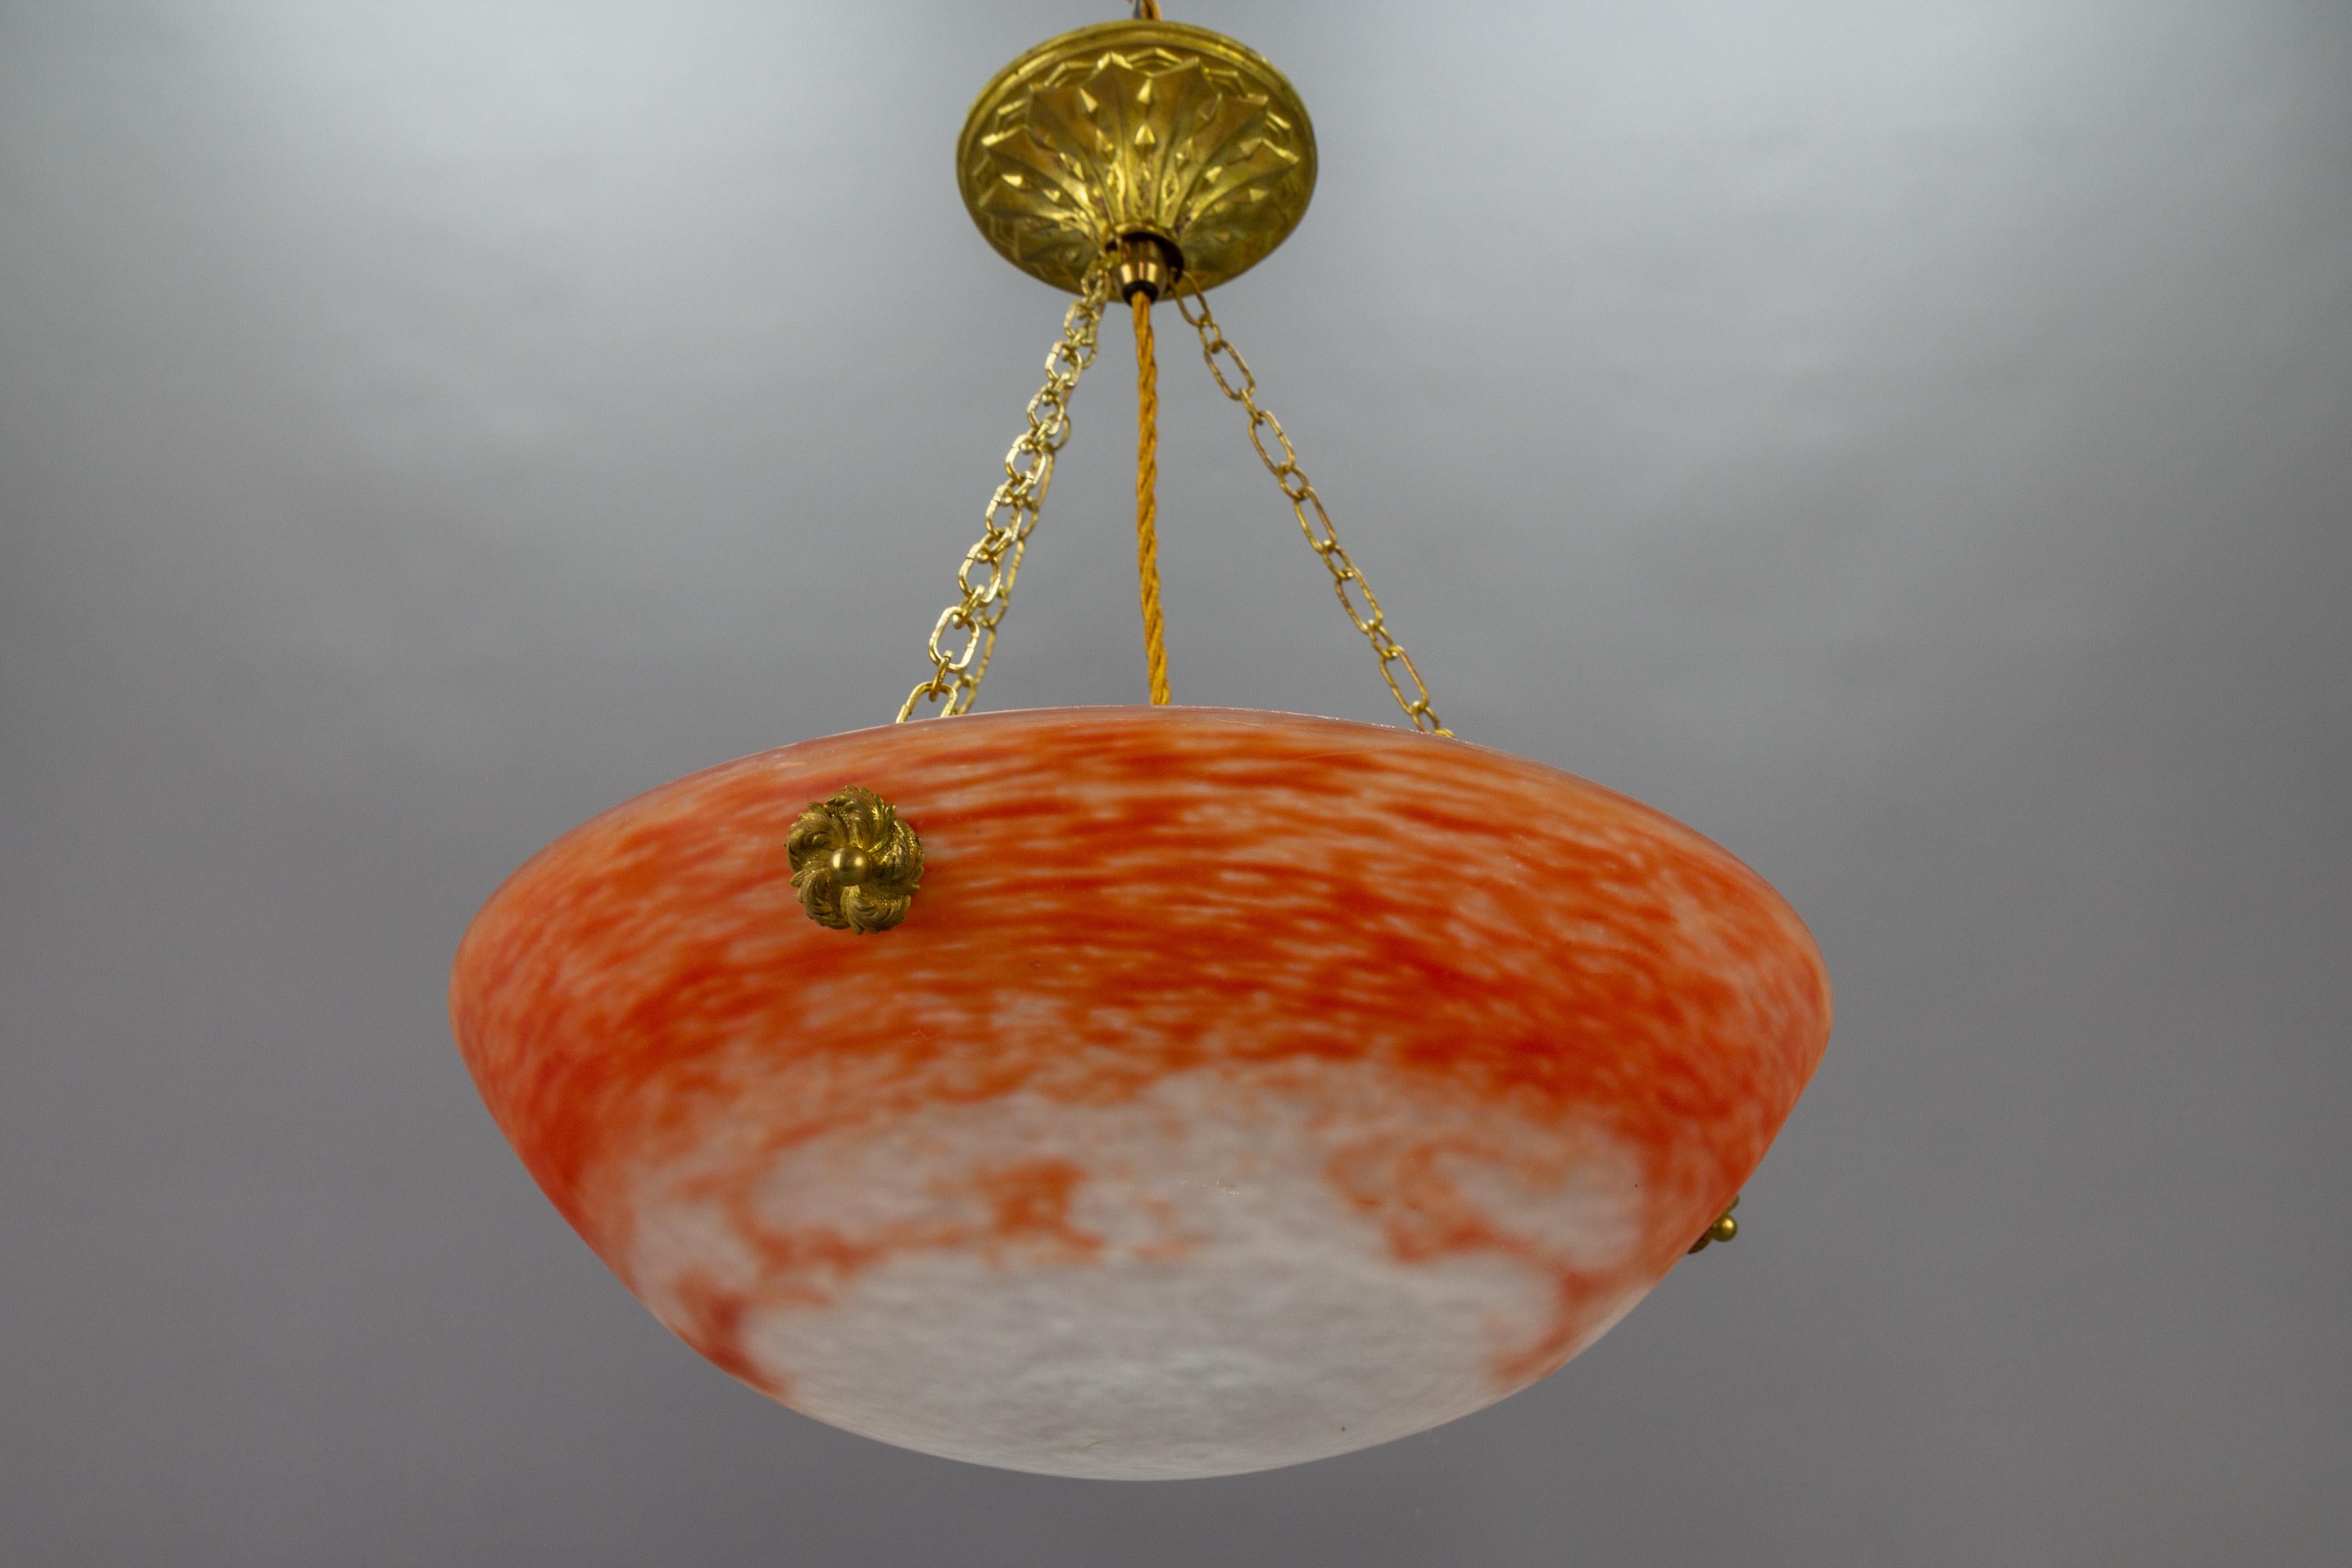 Early 20th Century French Art Nouveau Orange and White Glass Pendant Light Signed Noverdy, 1920s For Sale